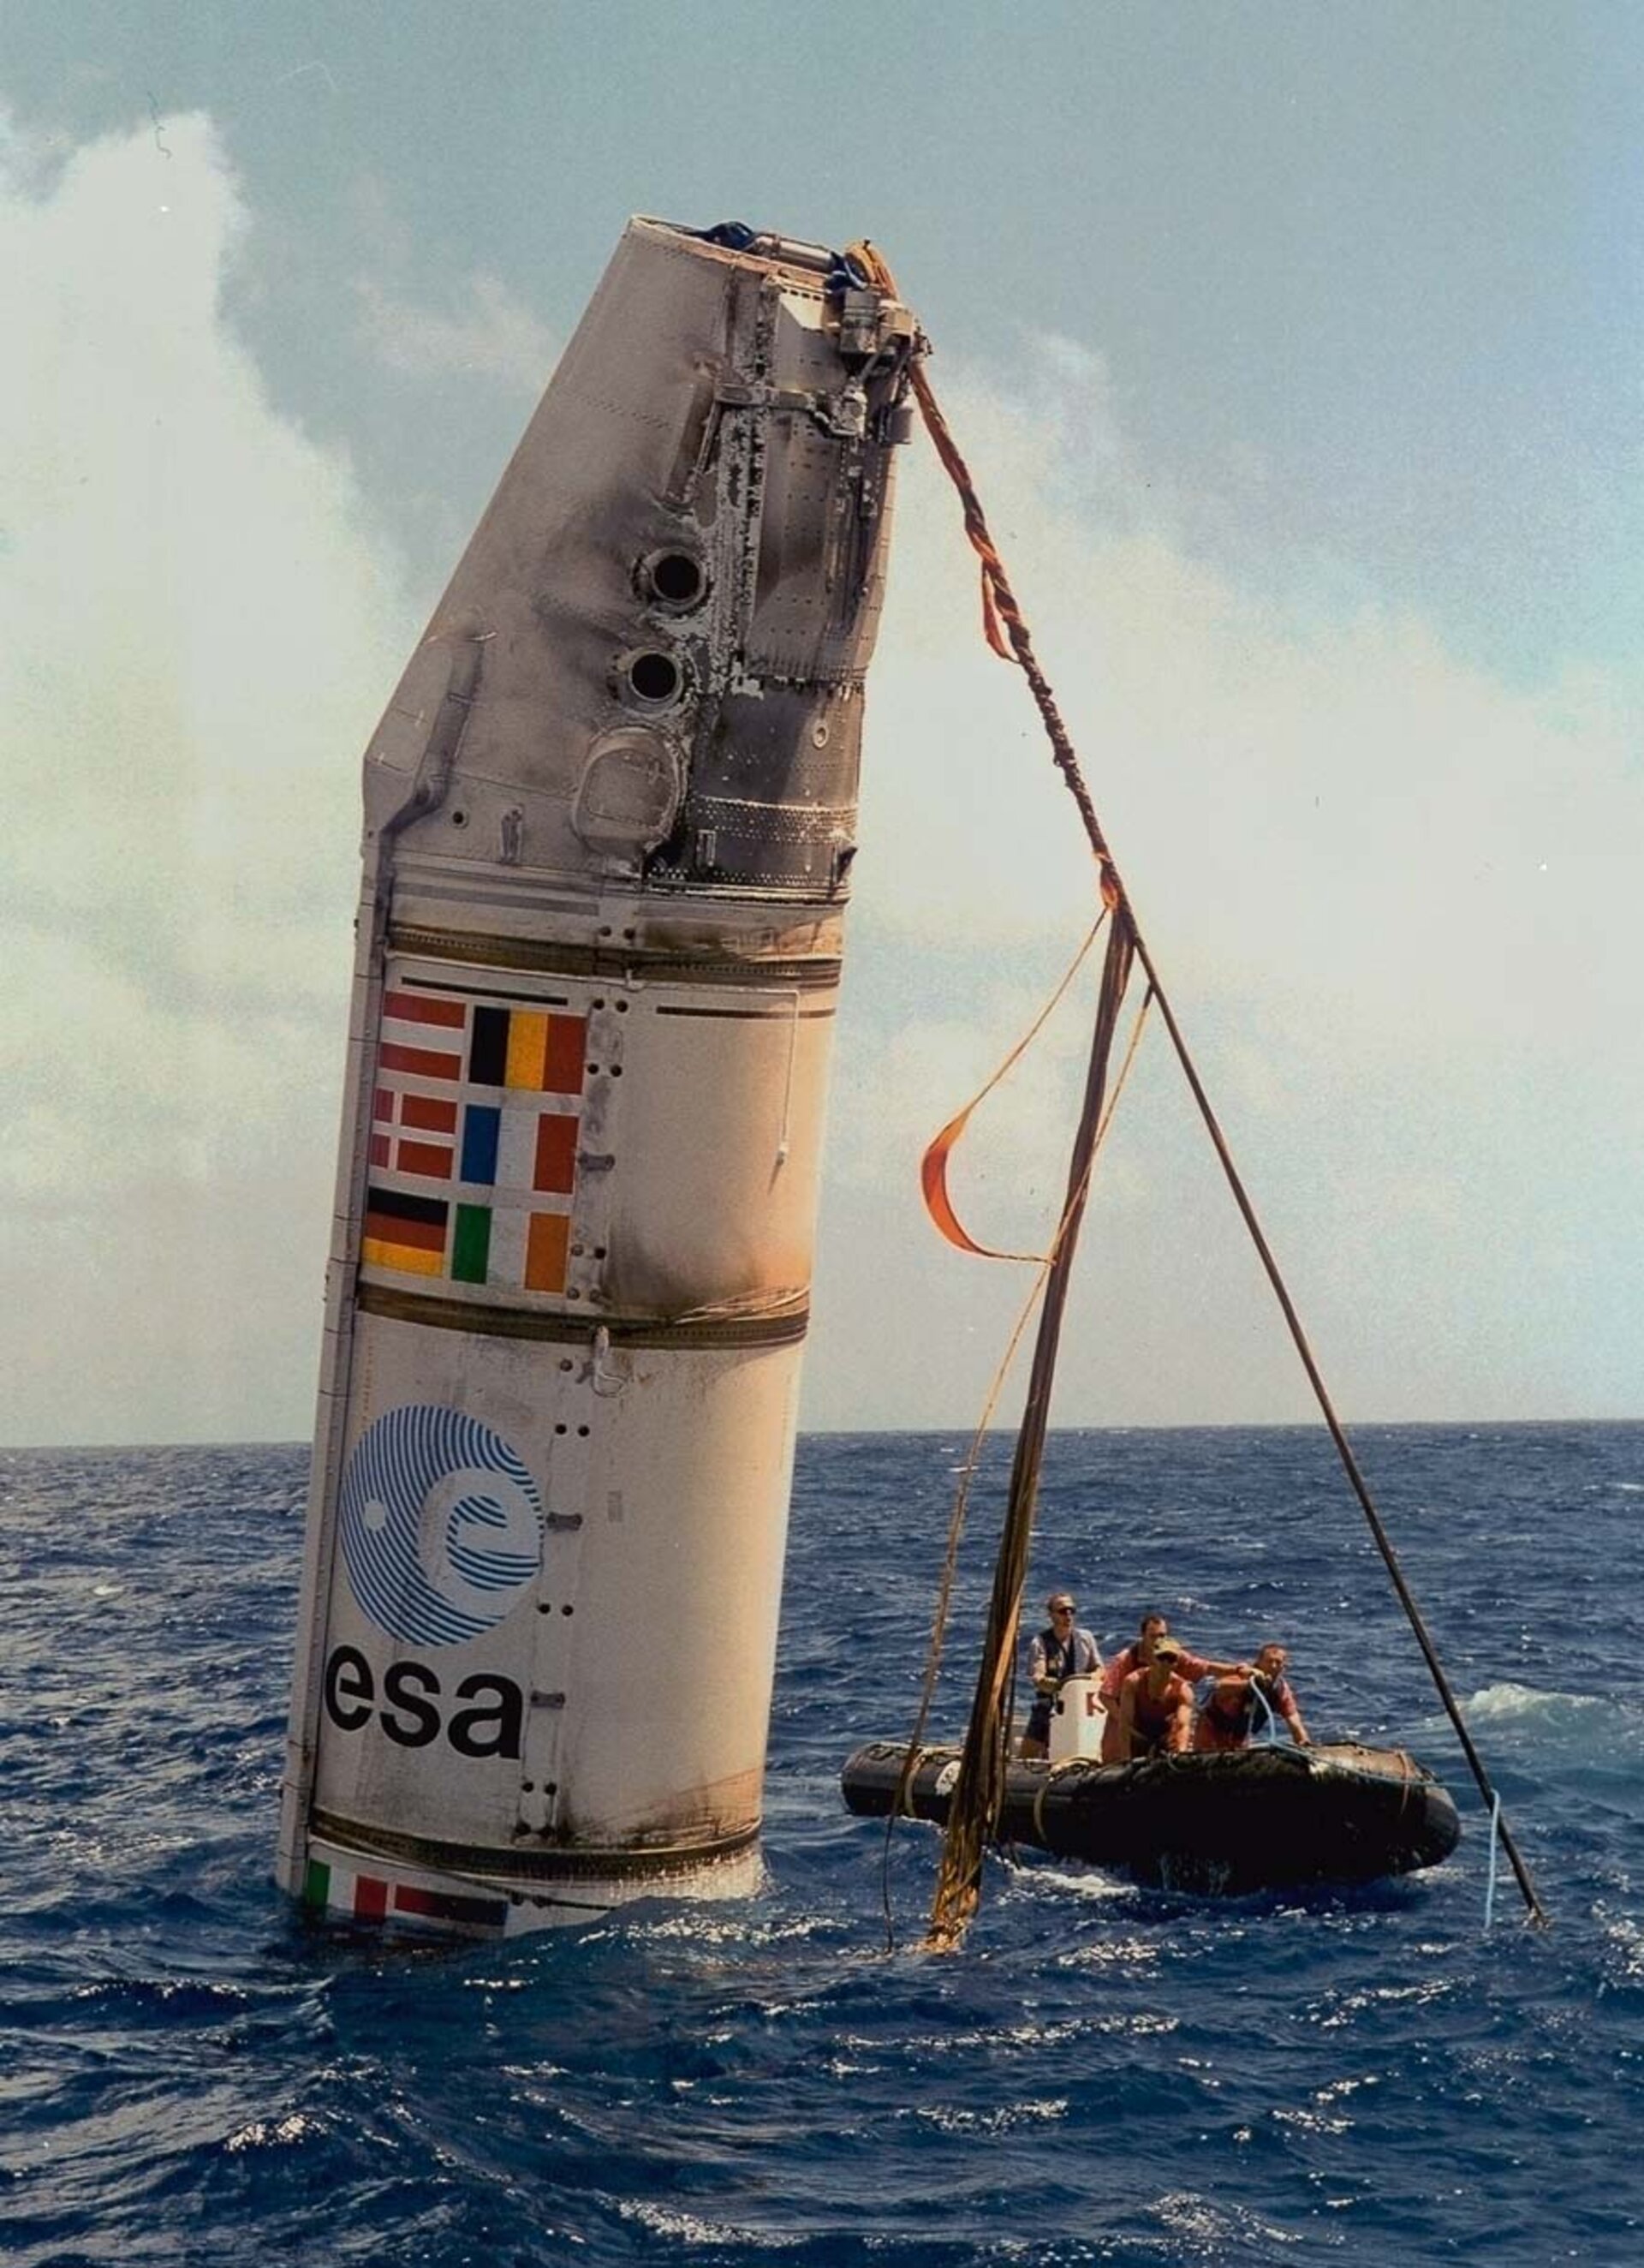 Ariane 503 booster recovery, 1998